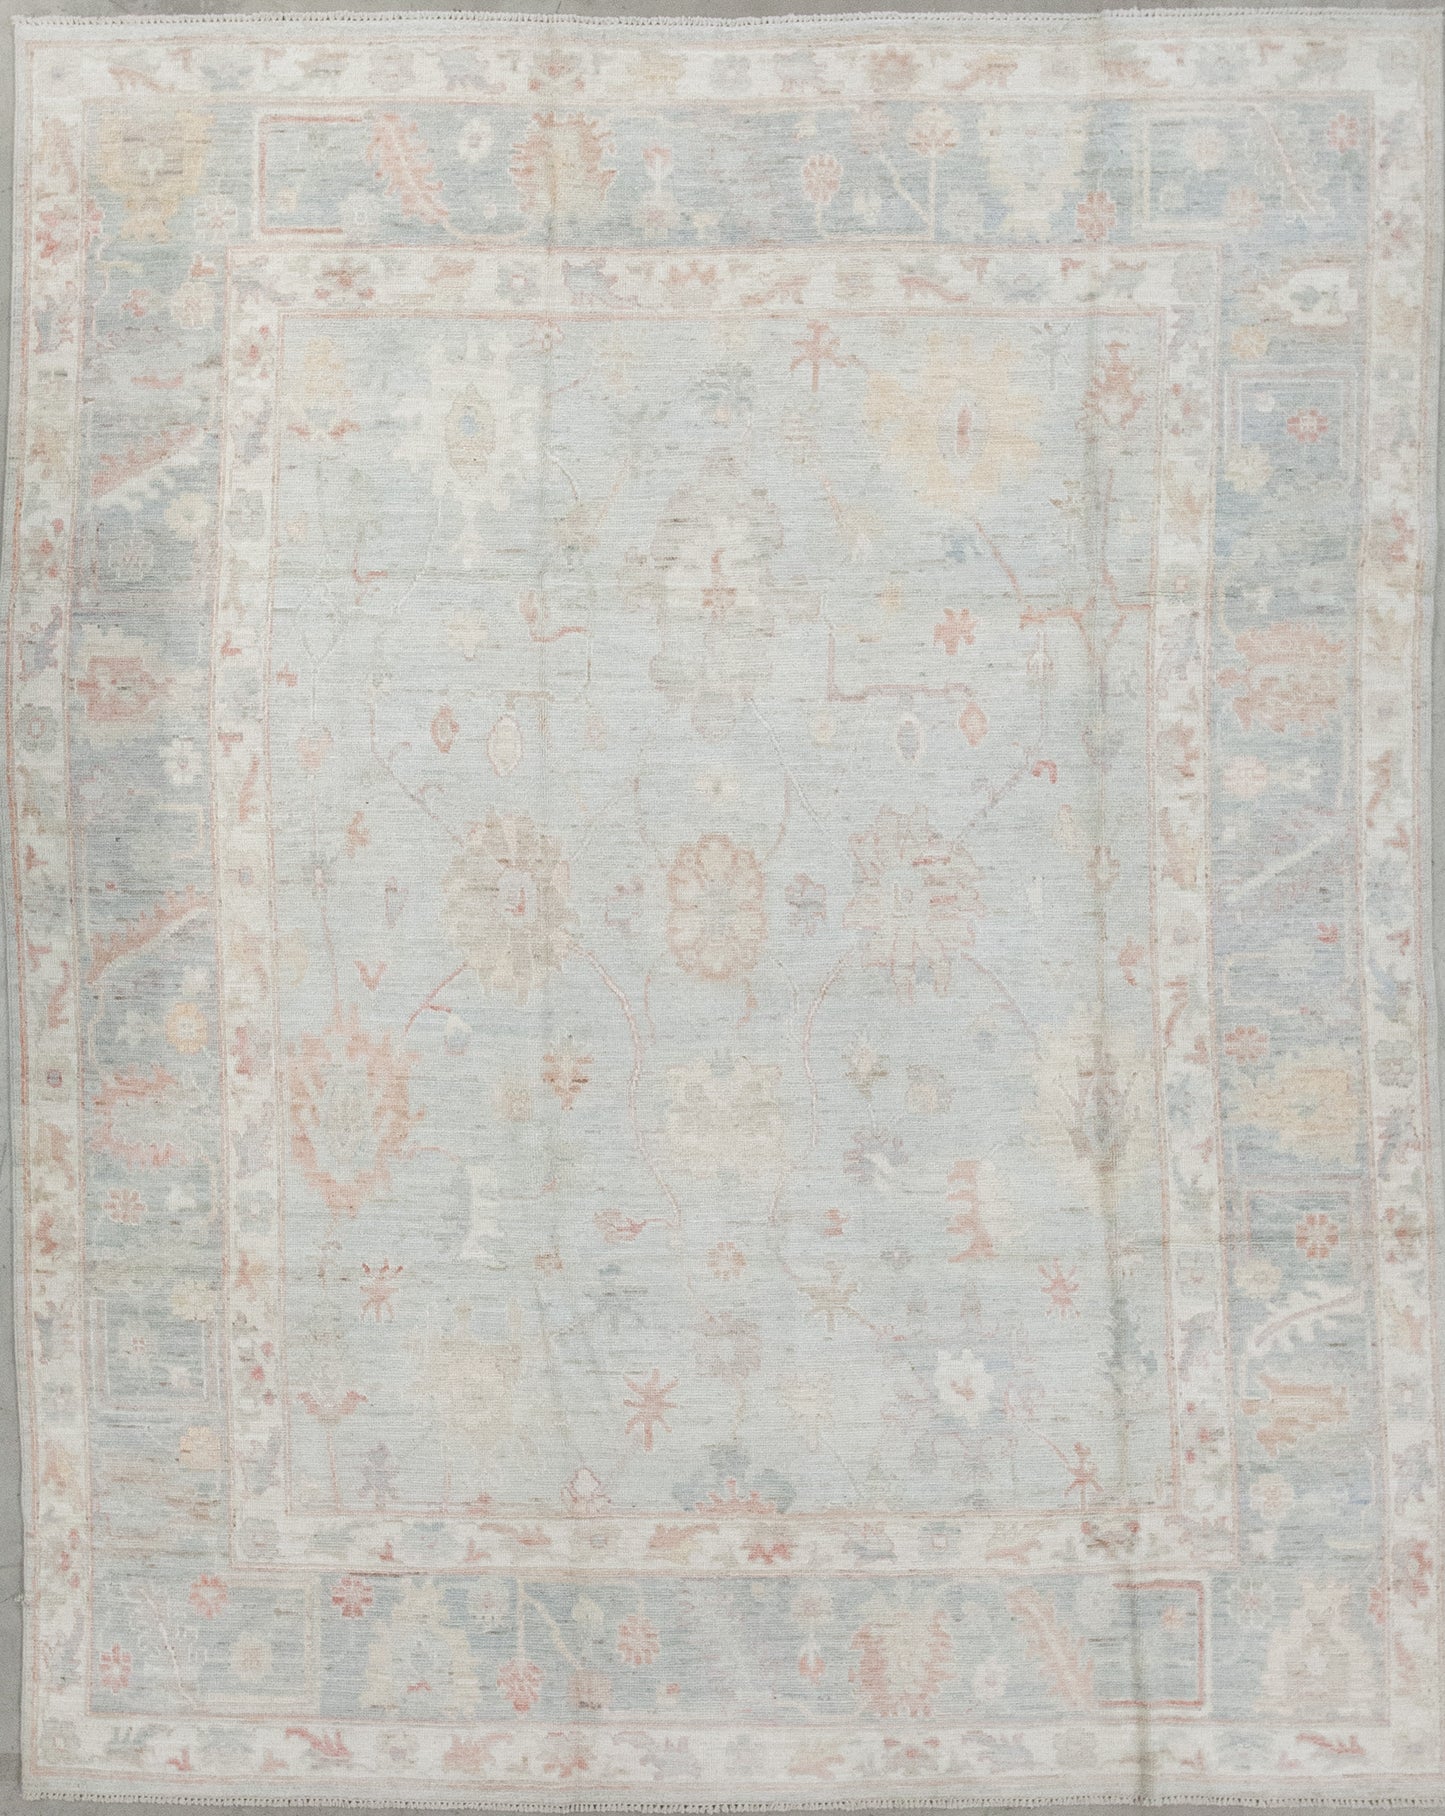 A sophisticated rug was woven in shades of beige as the dominant color, with orange, red, blue and white as contrasts. The design features abstract red and white poppies, sunflowers, and branches all around it.